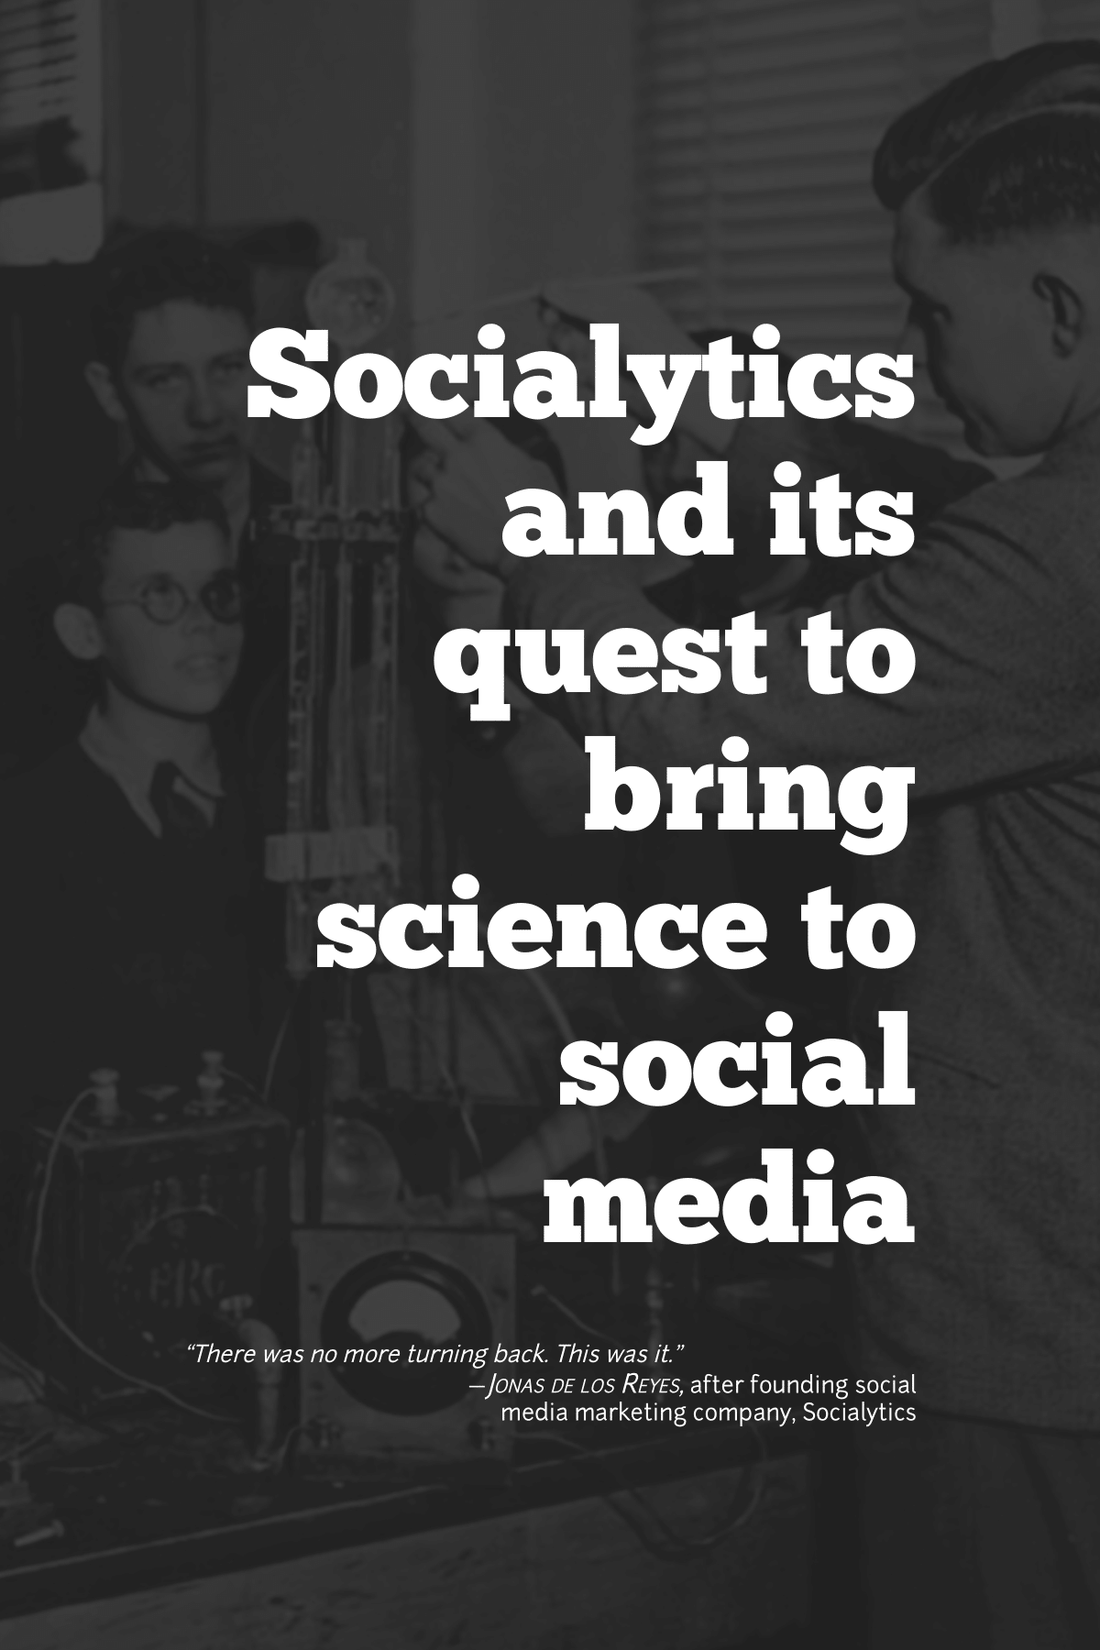 Socialytics and its quest to bring science to social media